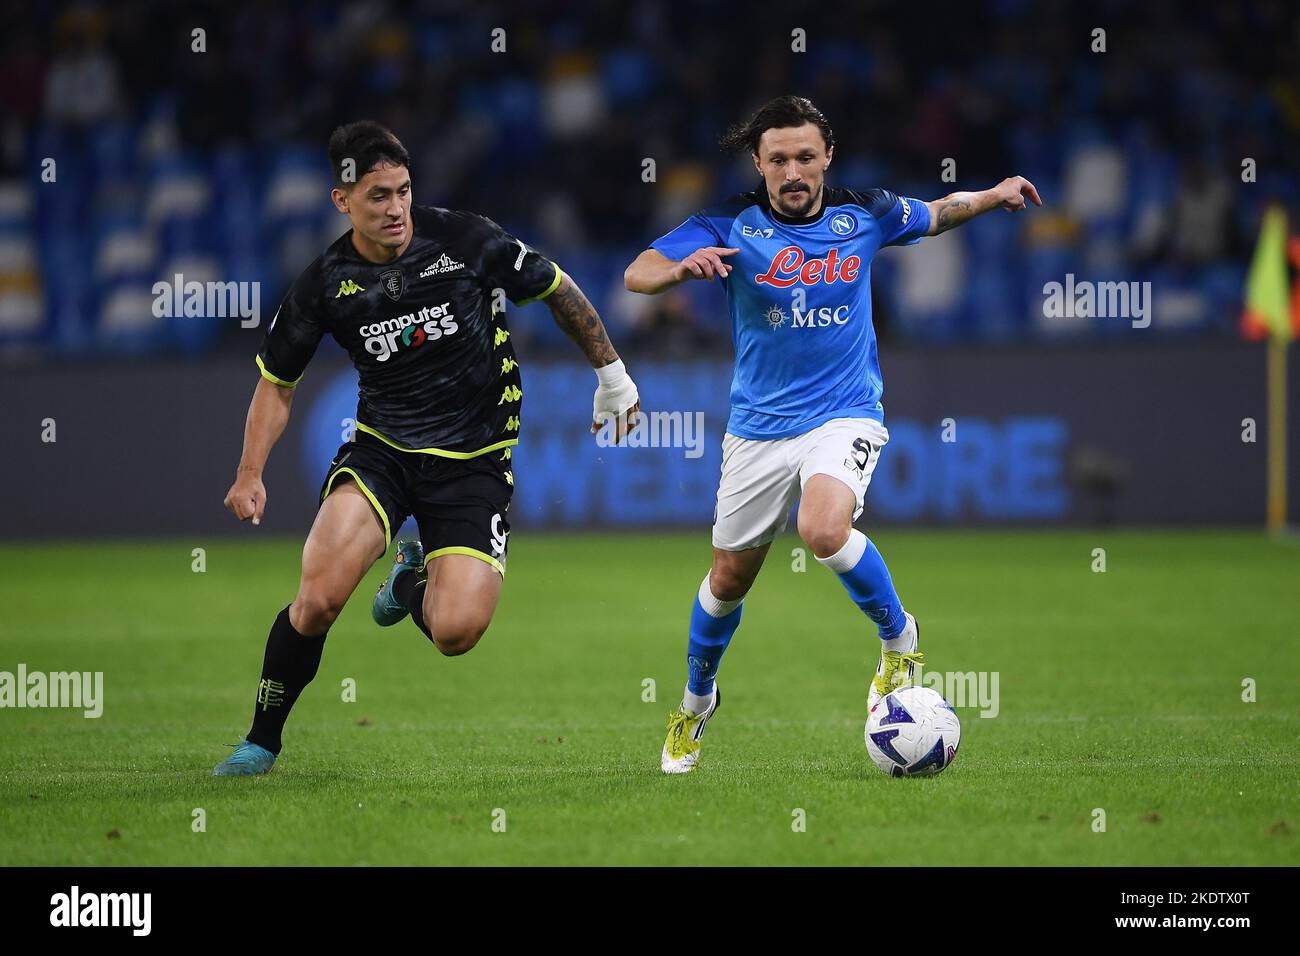 Naples, Italy. 08th Nov, 2022. Mario Rui of SSC Napoli and Martín Satriano of Empoli FC compete for the ball during the Serie A match between SSC Napoli and Empoli FC at Stadio Diego Armando Maradona, Naples, Italy on 8 November 2022. Credit: Nicola Ianuale/Alamy Live News Stock Photo